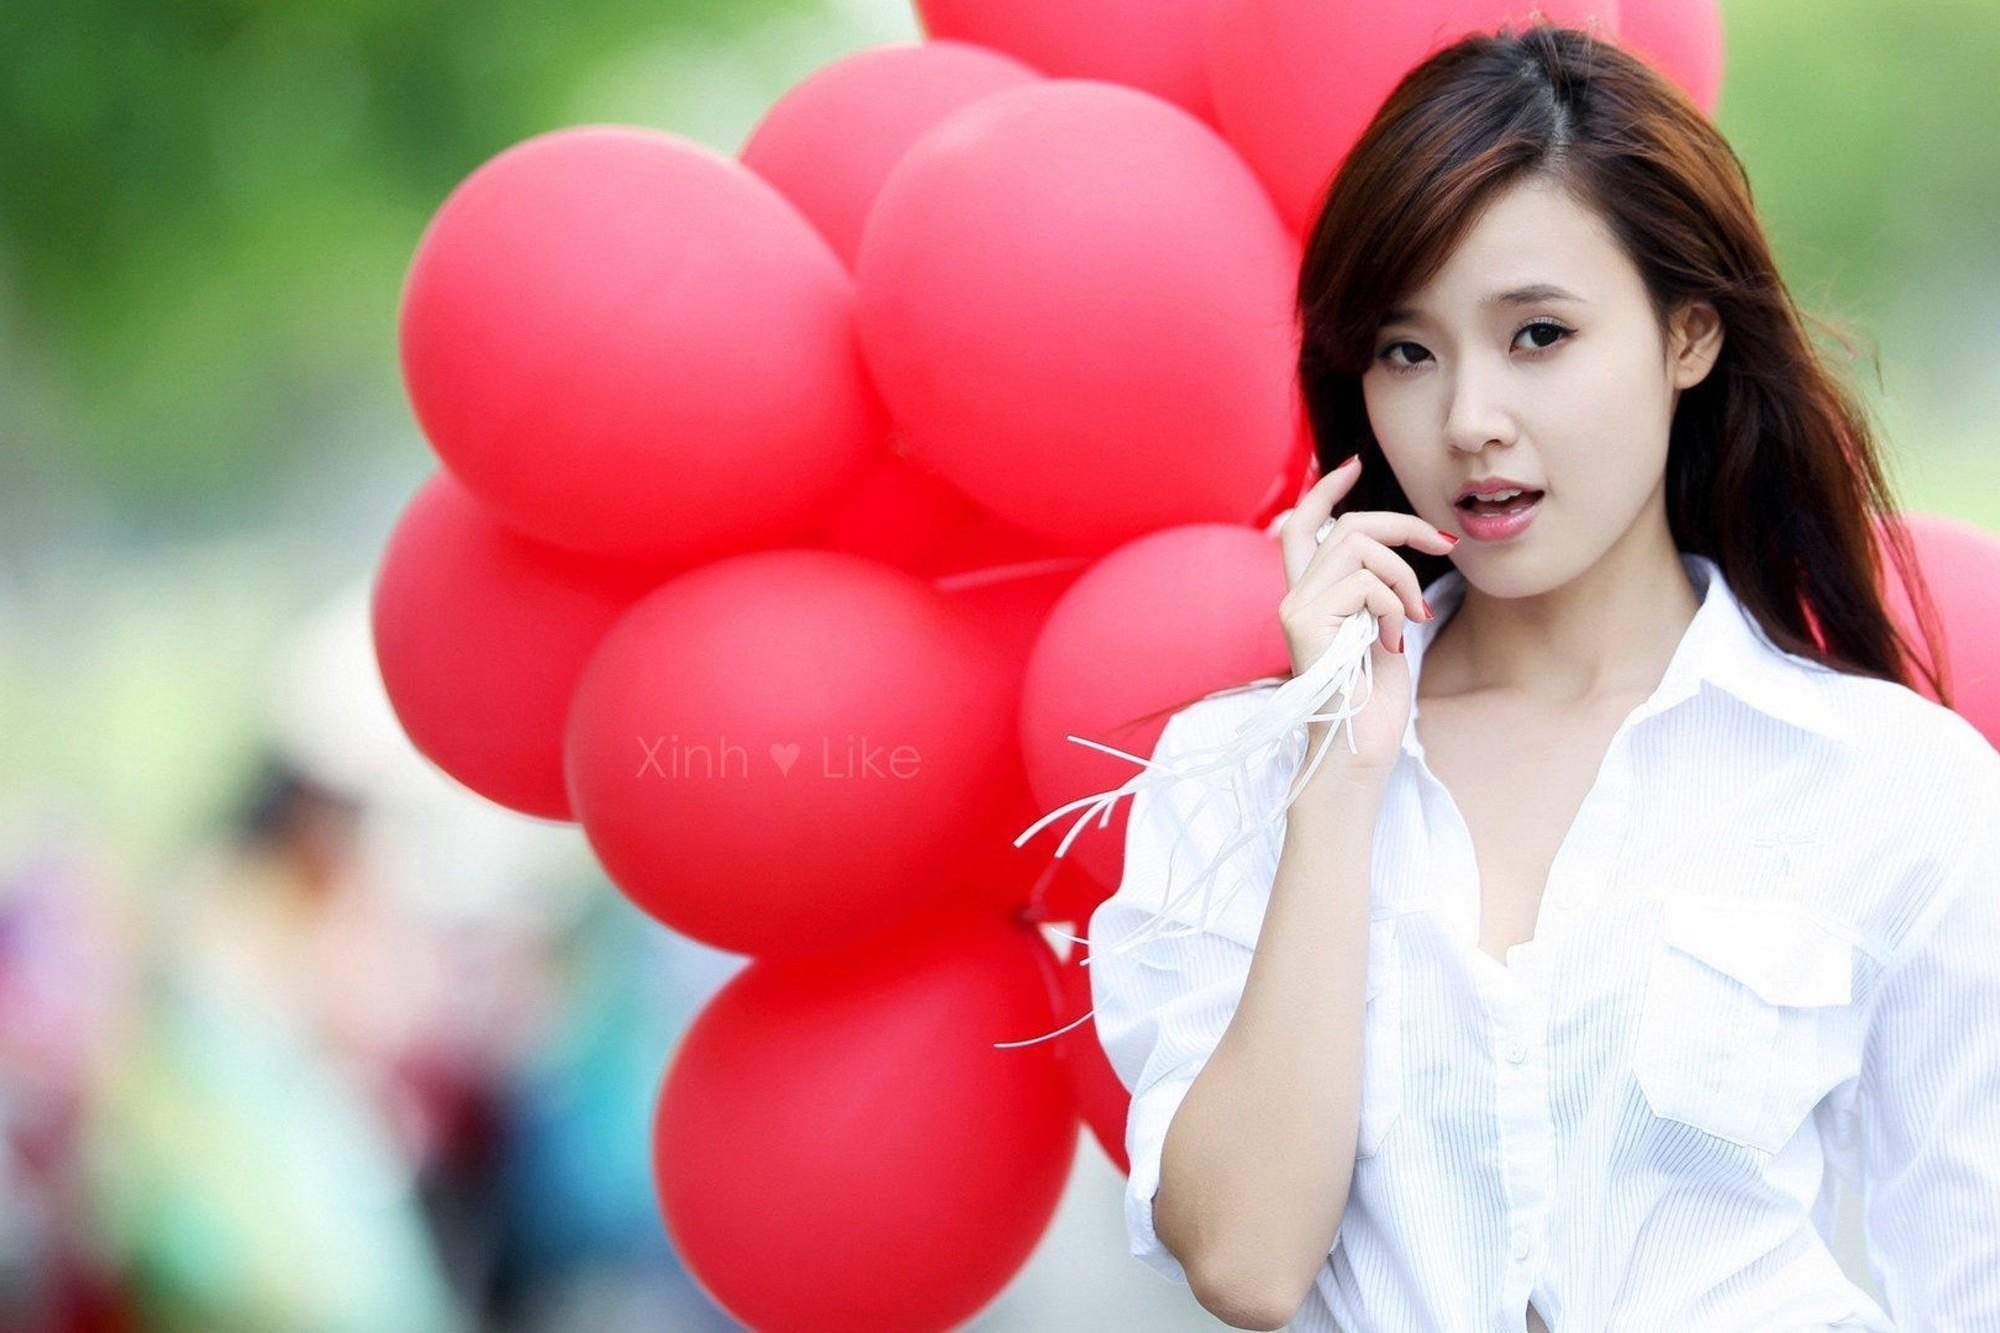 Beautiful girl with balloons wallpaper. PC